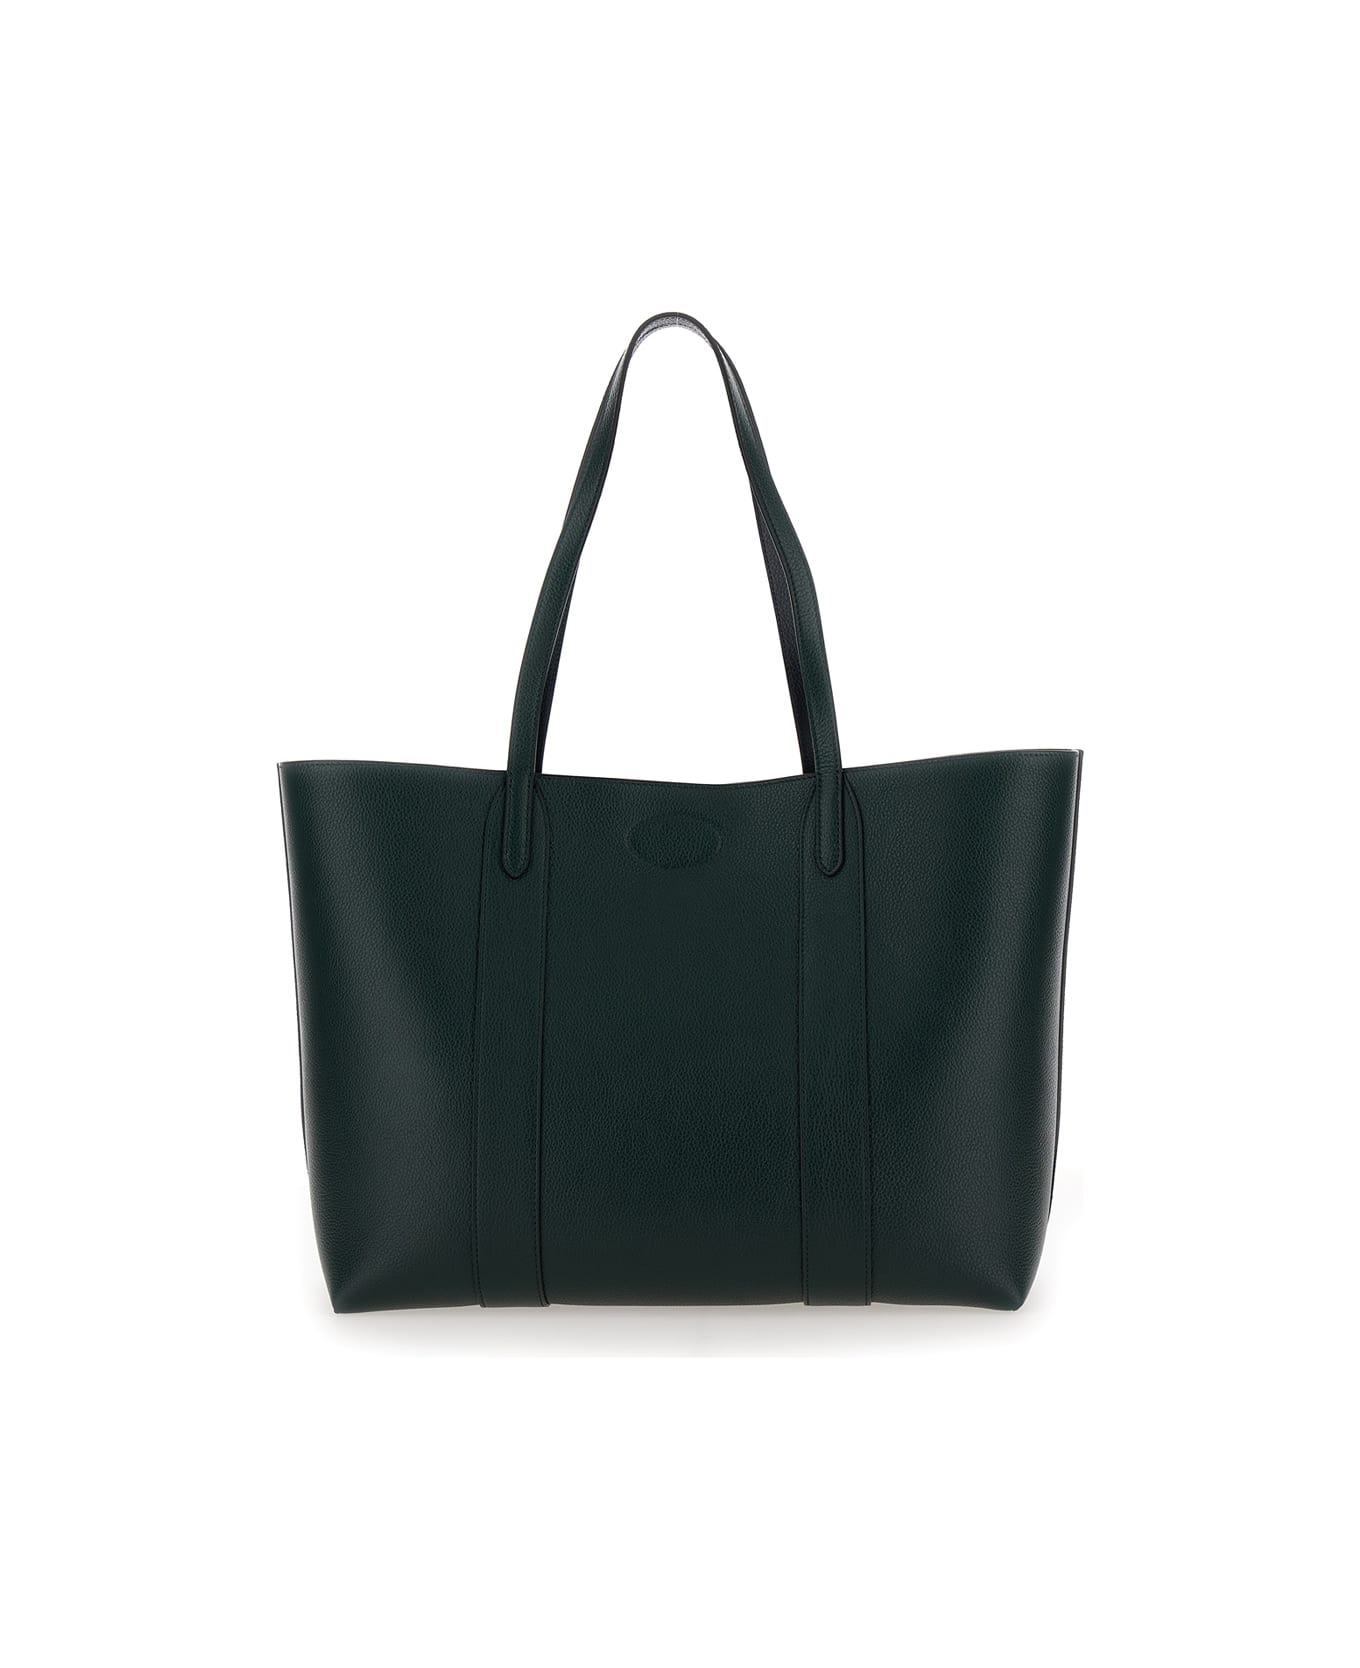 Mulberry 'bayswater Small' Green Tote Bag With Postman's Lock Closure In Leather Woman - Green トートバッグ